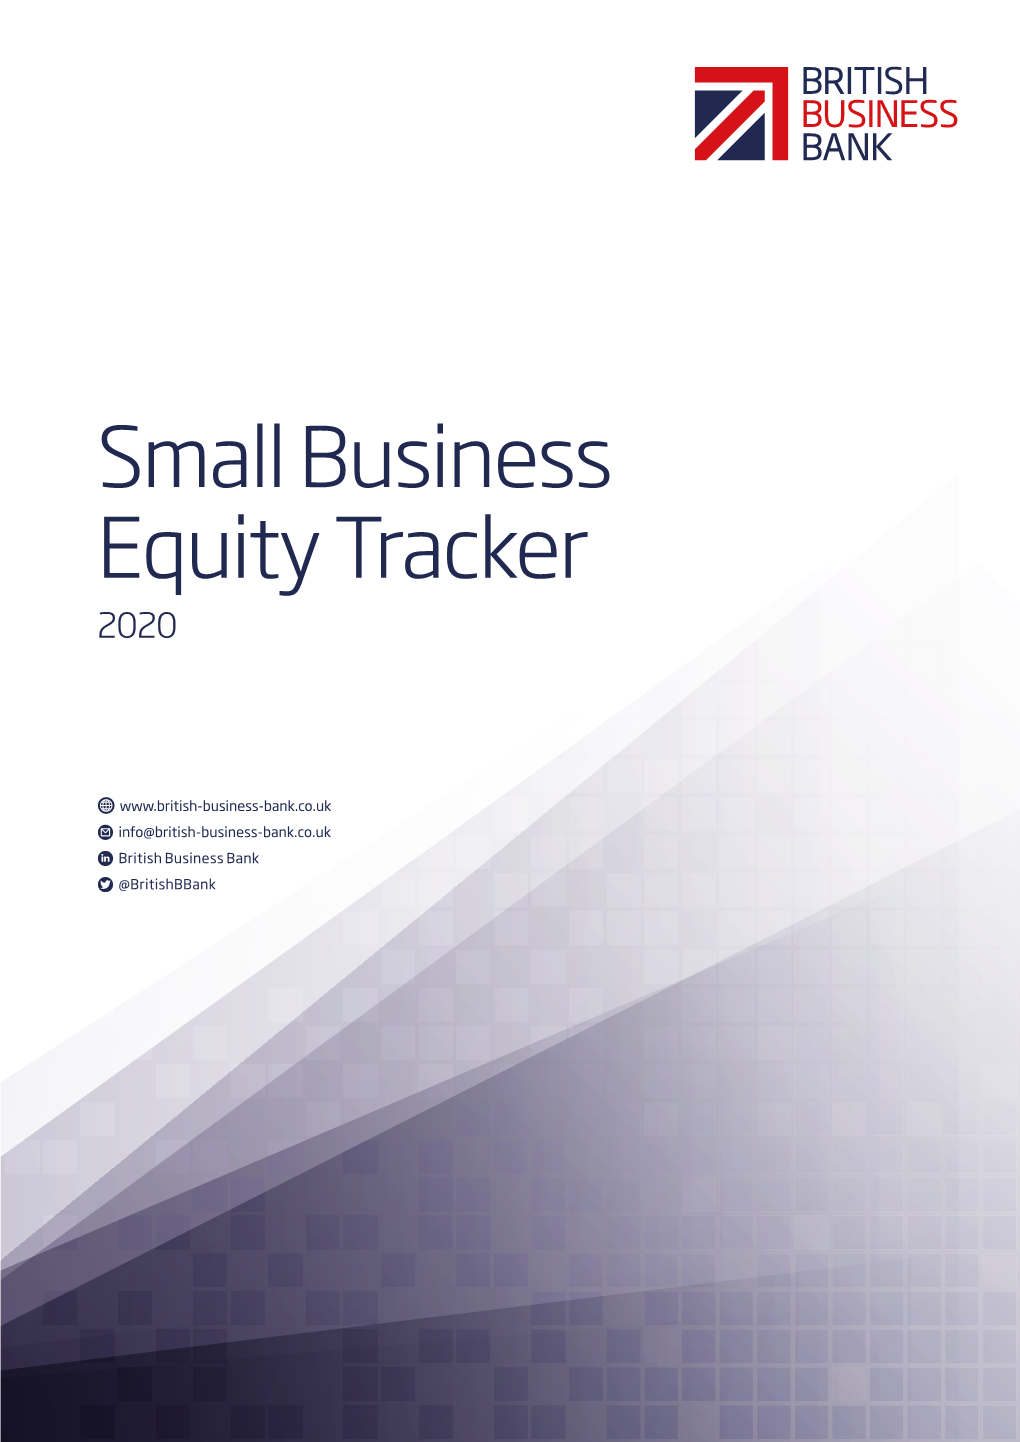 British Business Bank Small Business Equity Tracker 2020 Report